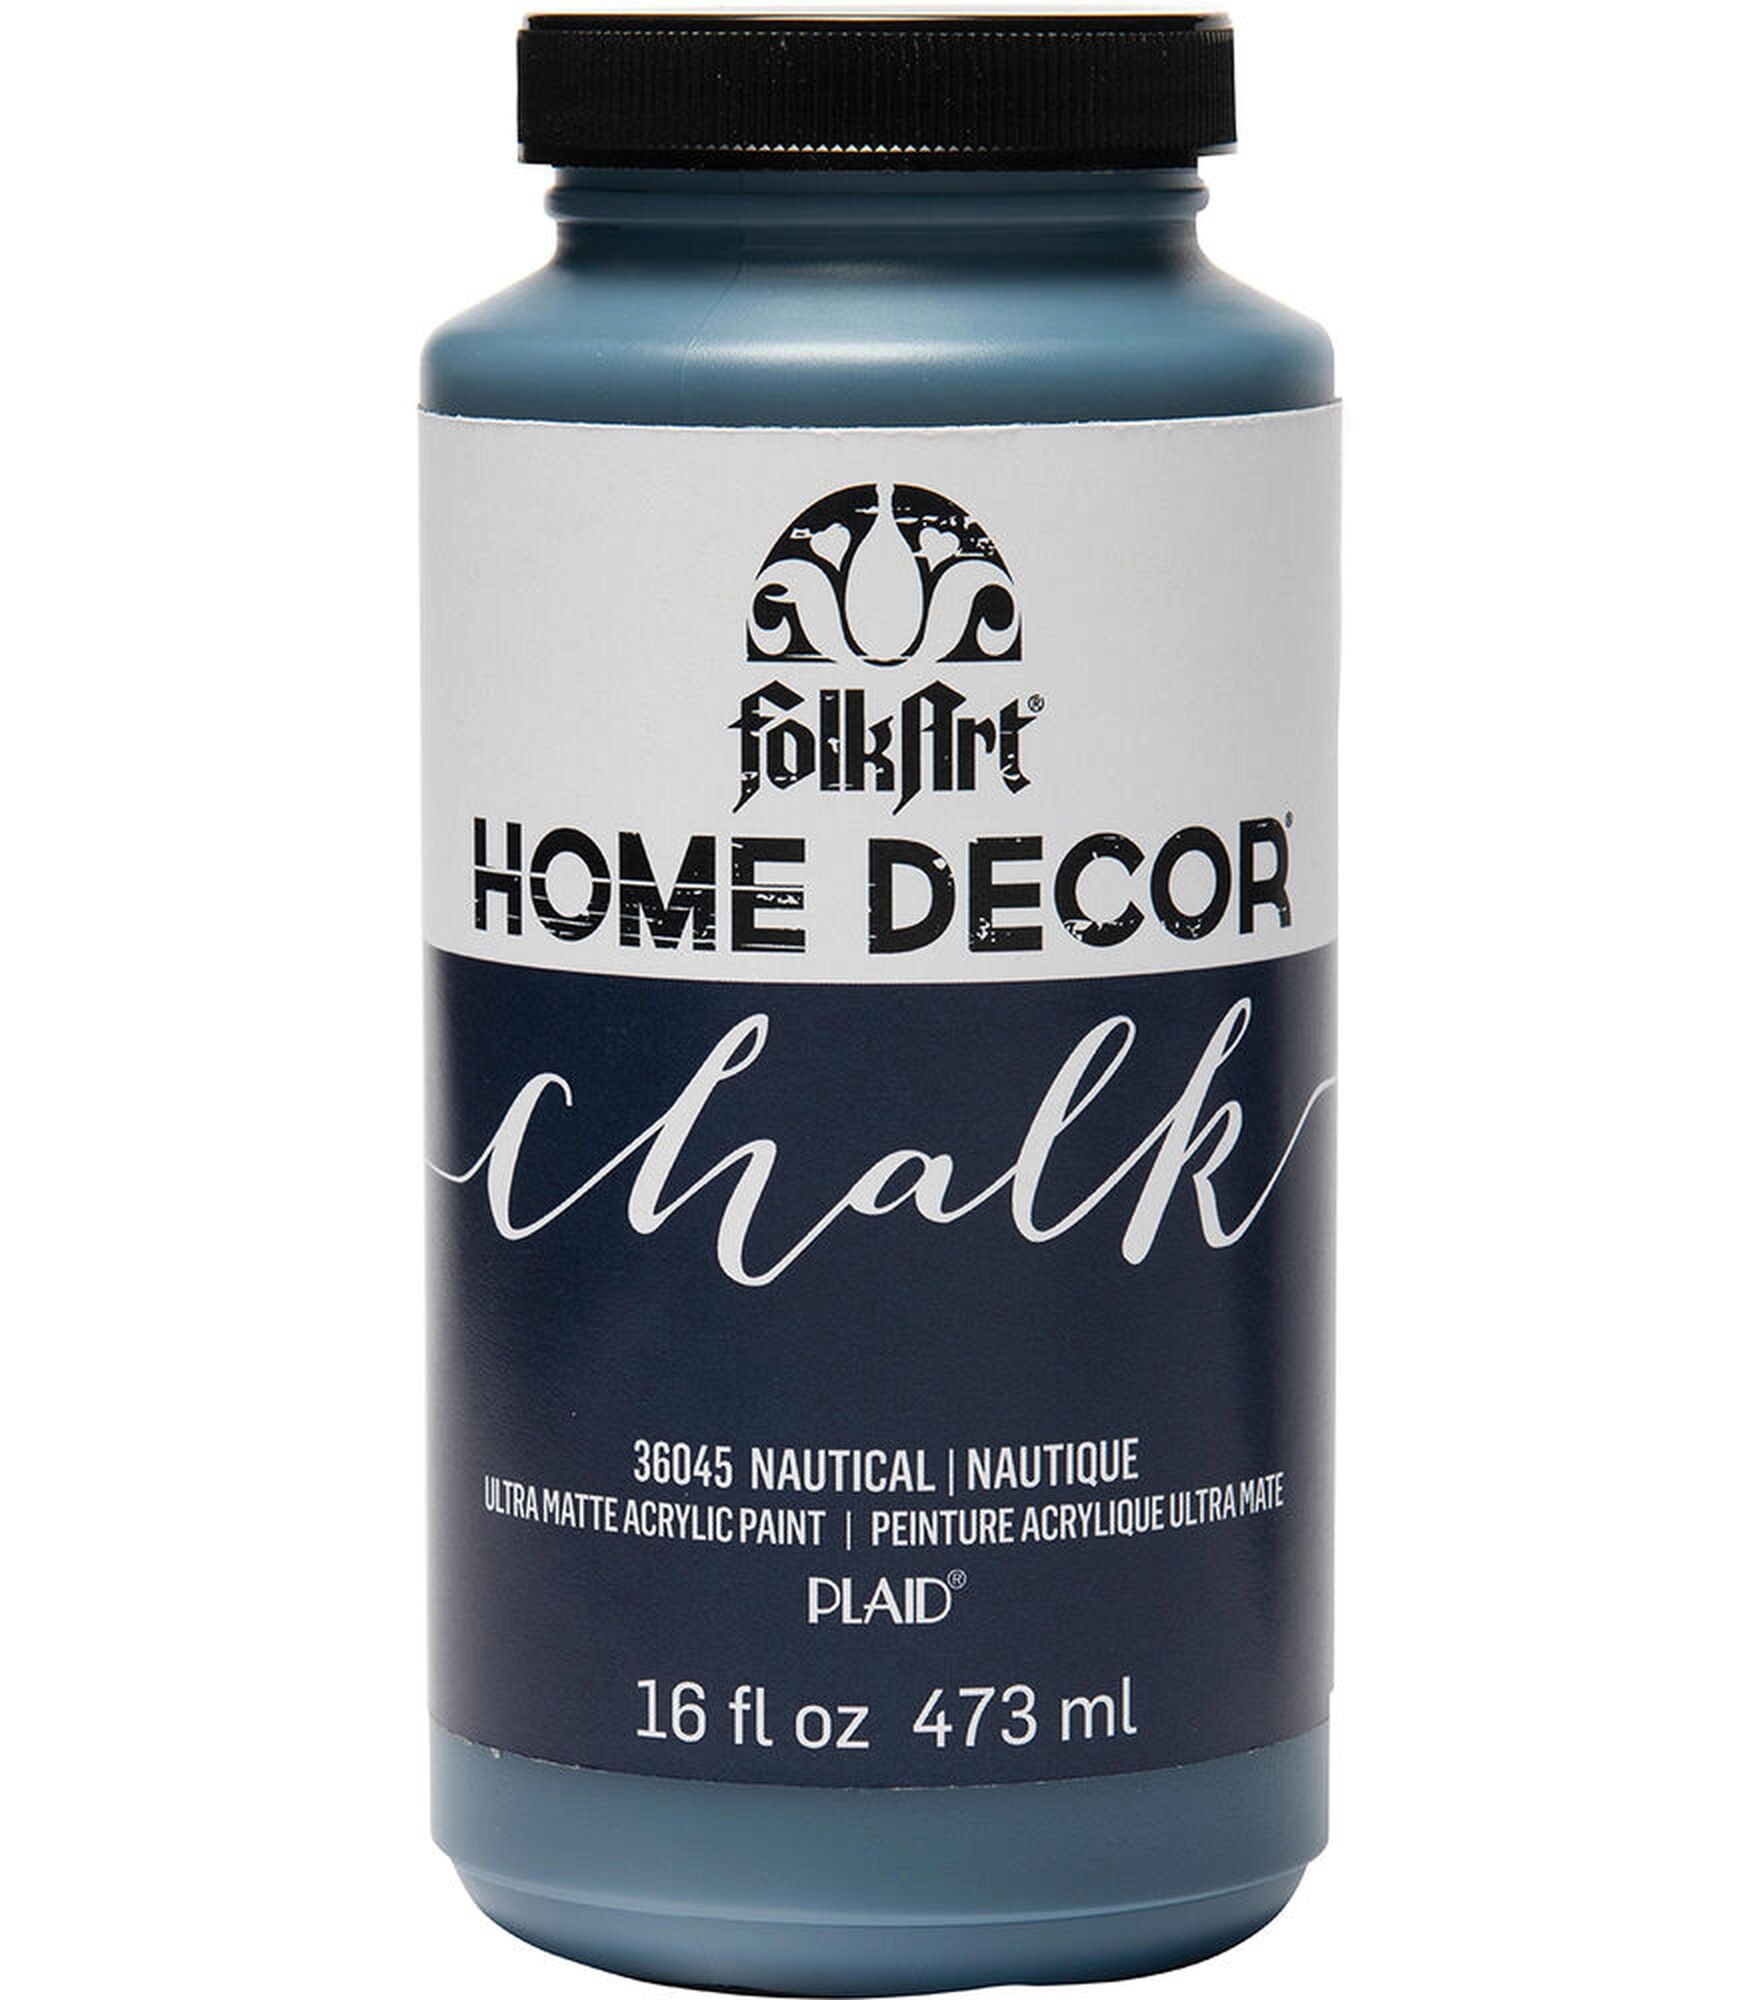  FolkArt Home Decor Ultra Matte Chalk Finish Acrylic Craft Paint  Set Formulated for No-Prep Application Designed for Beginners and Artists,  2 oz Bottles, Top Colors